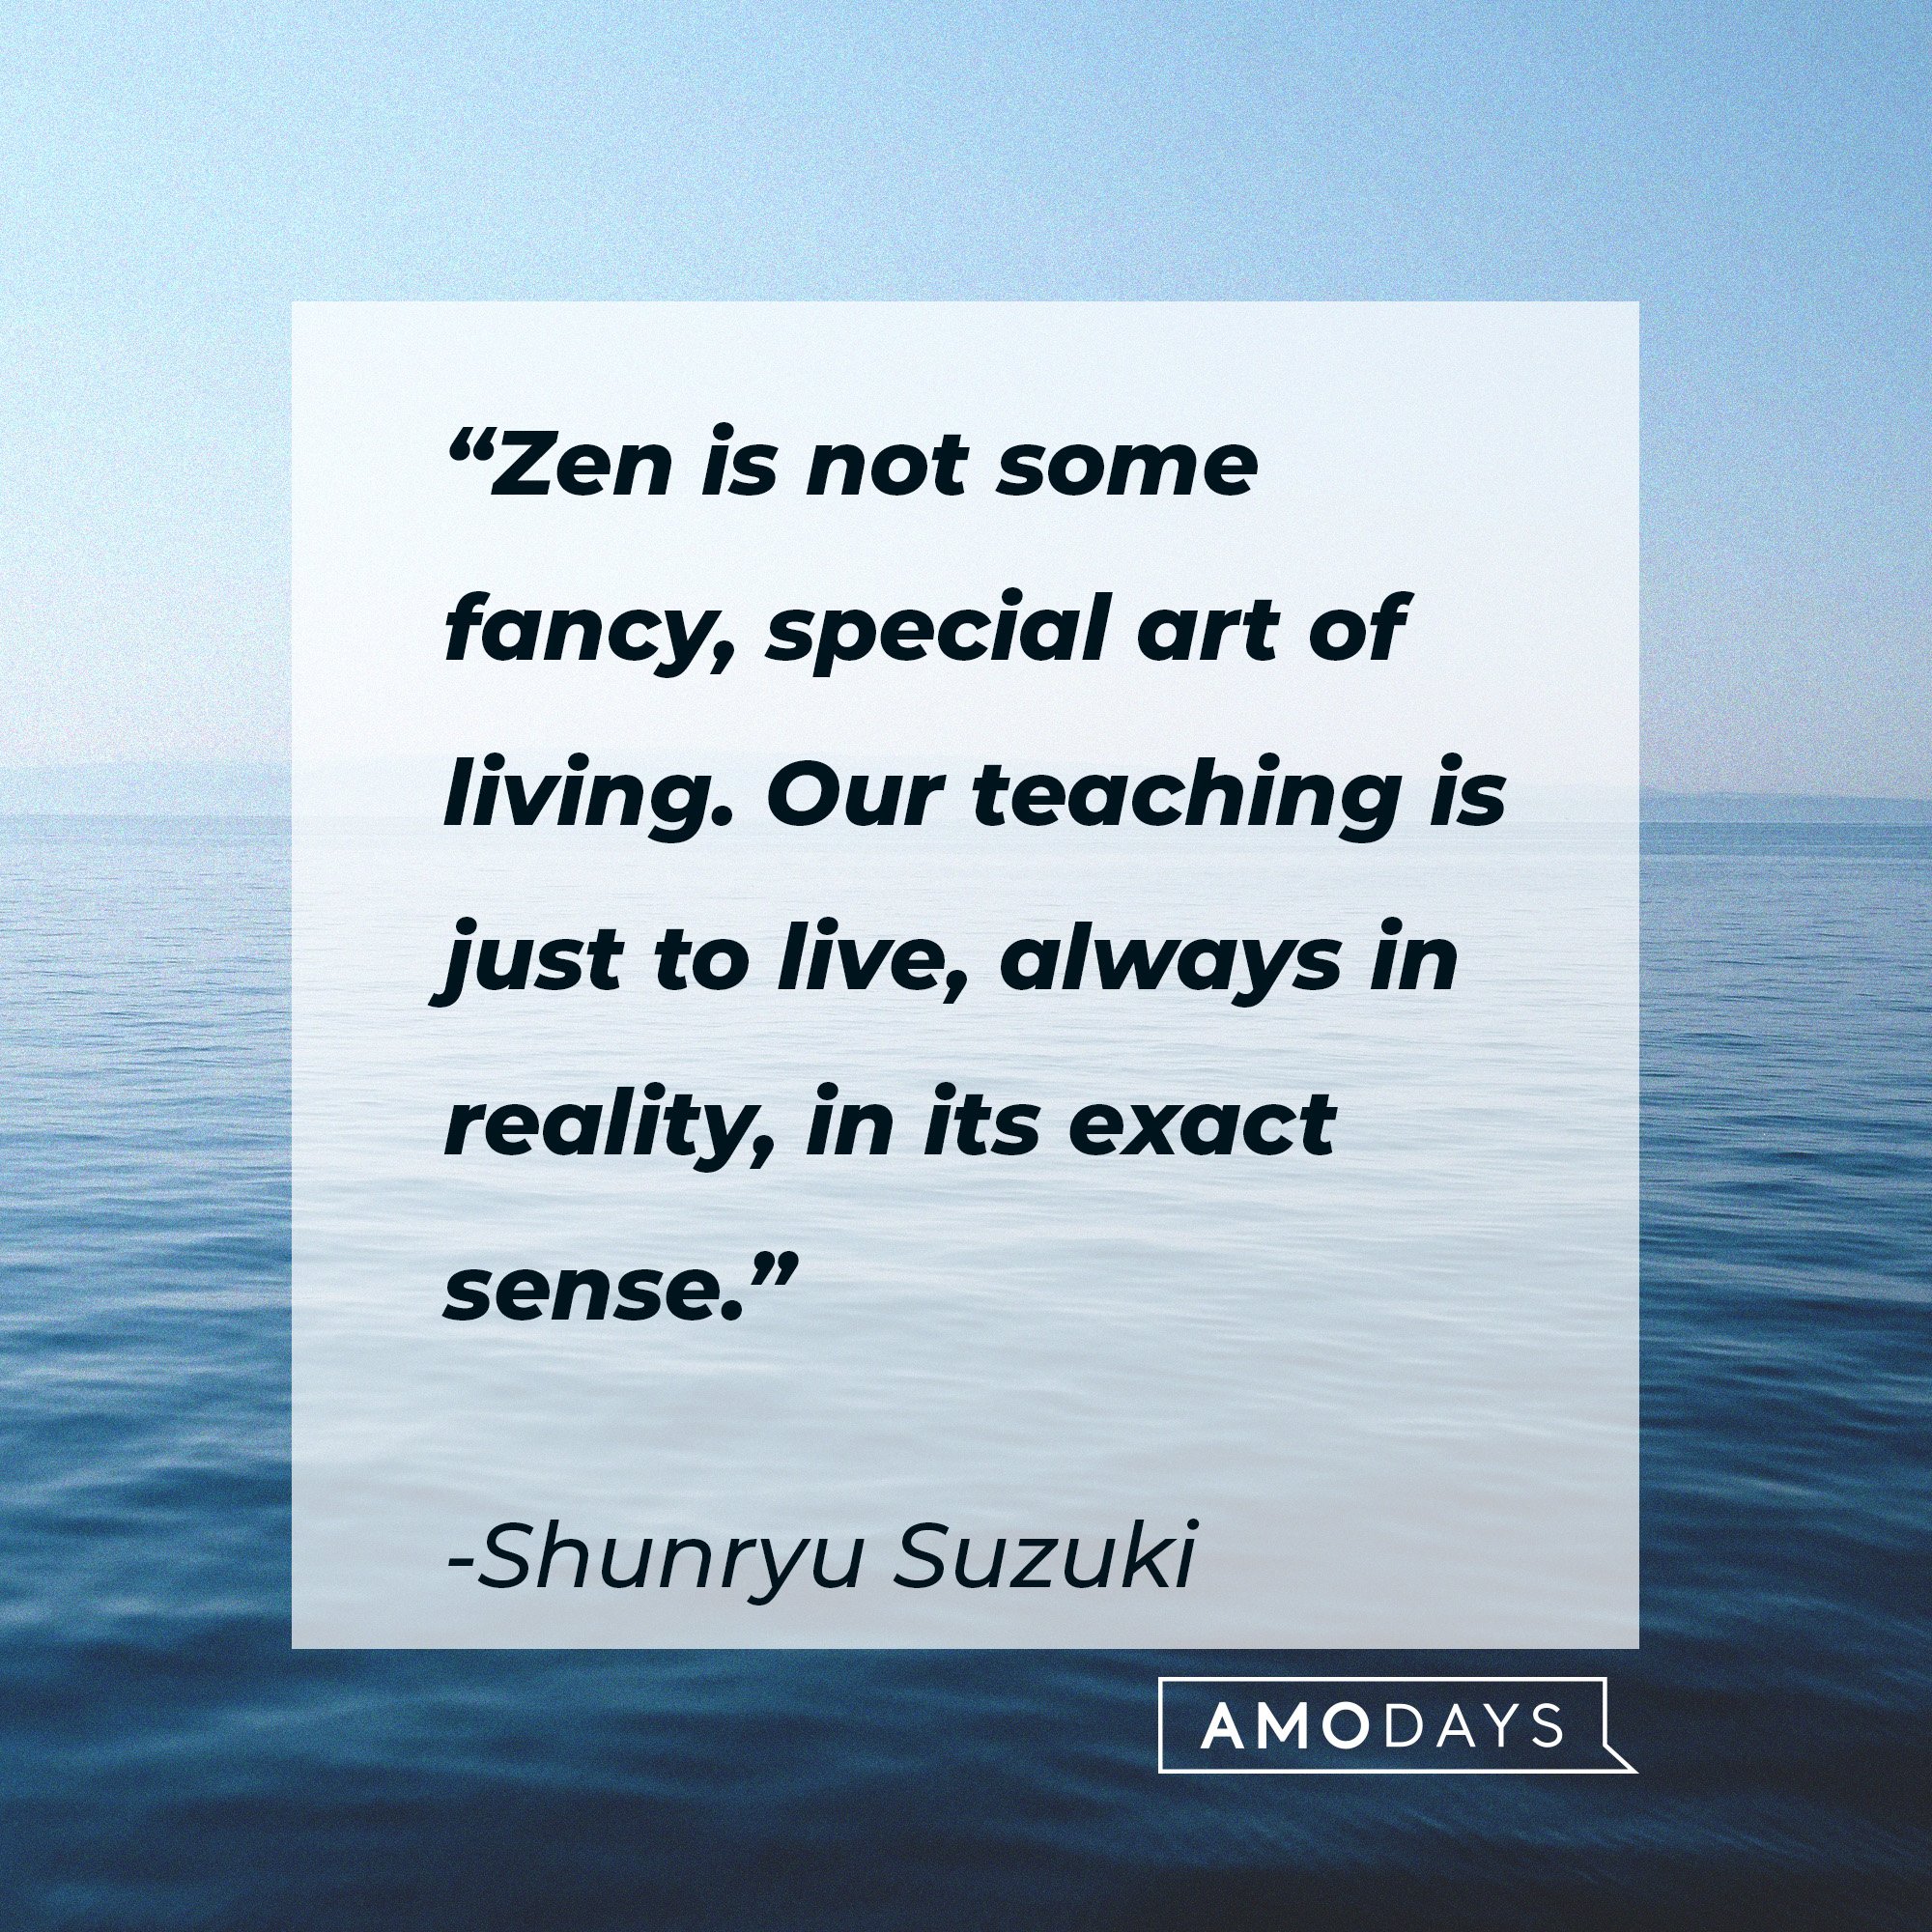 Shunryu Suzuki's quote: “Zen is not some fancy, special art of living. Our teaching is just to live, always in reality, in its exact sense.” | Image: AmoDays